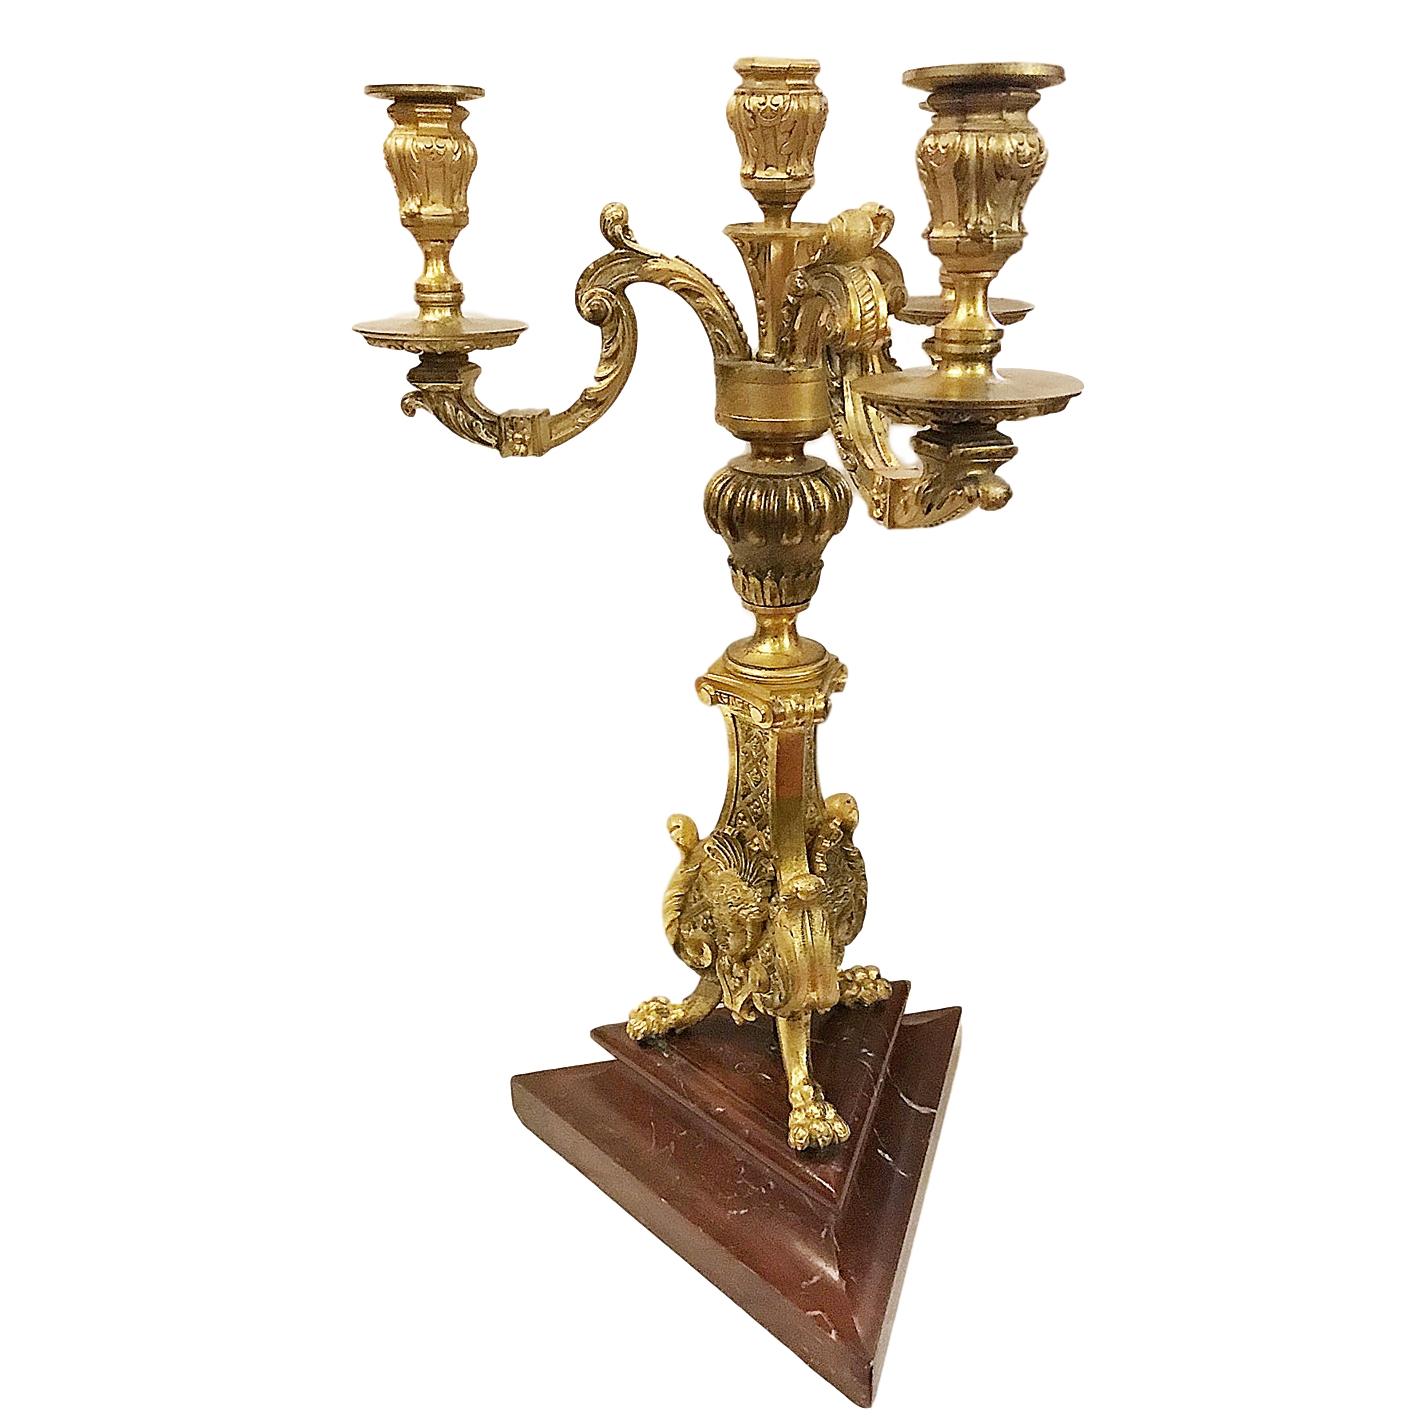 Pair of 19th century French bronze Doreé candlesticks with red marble bases.

Measurements:
Height 20.5